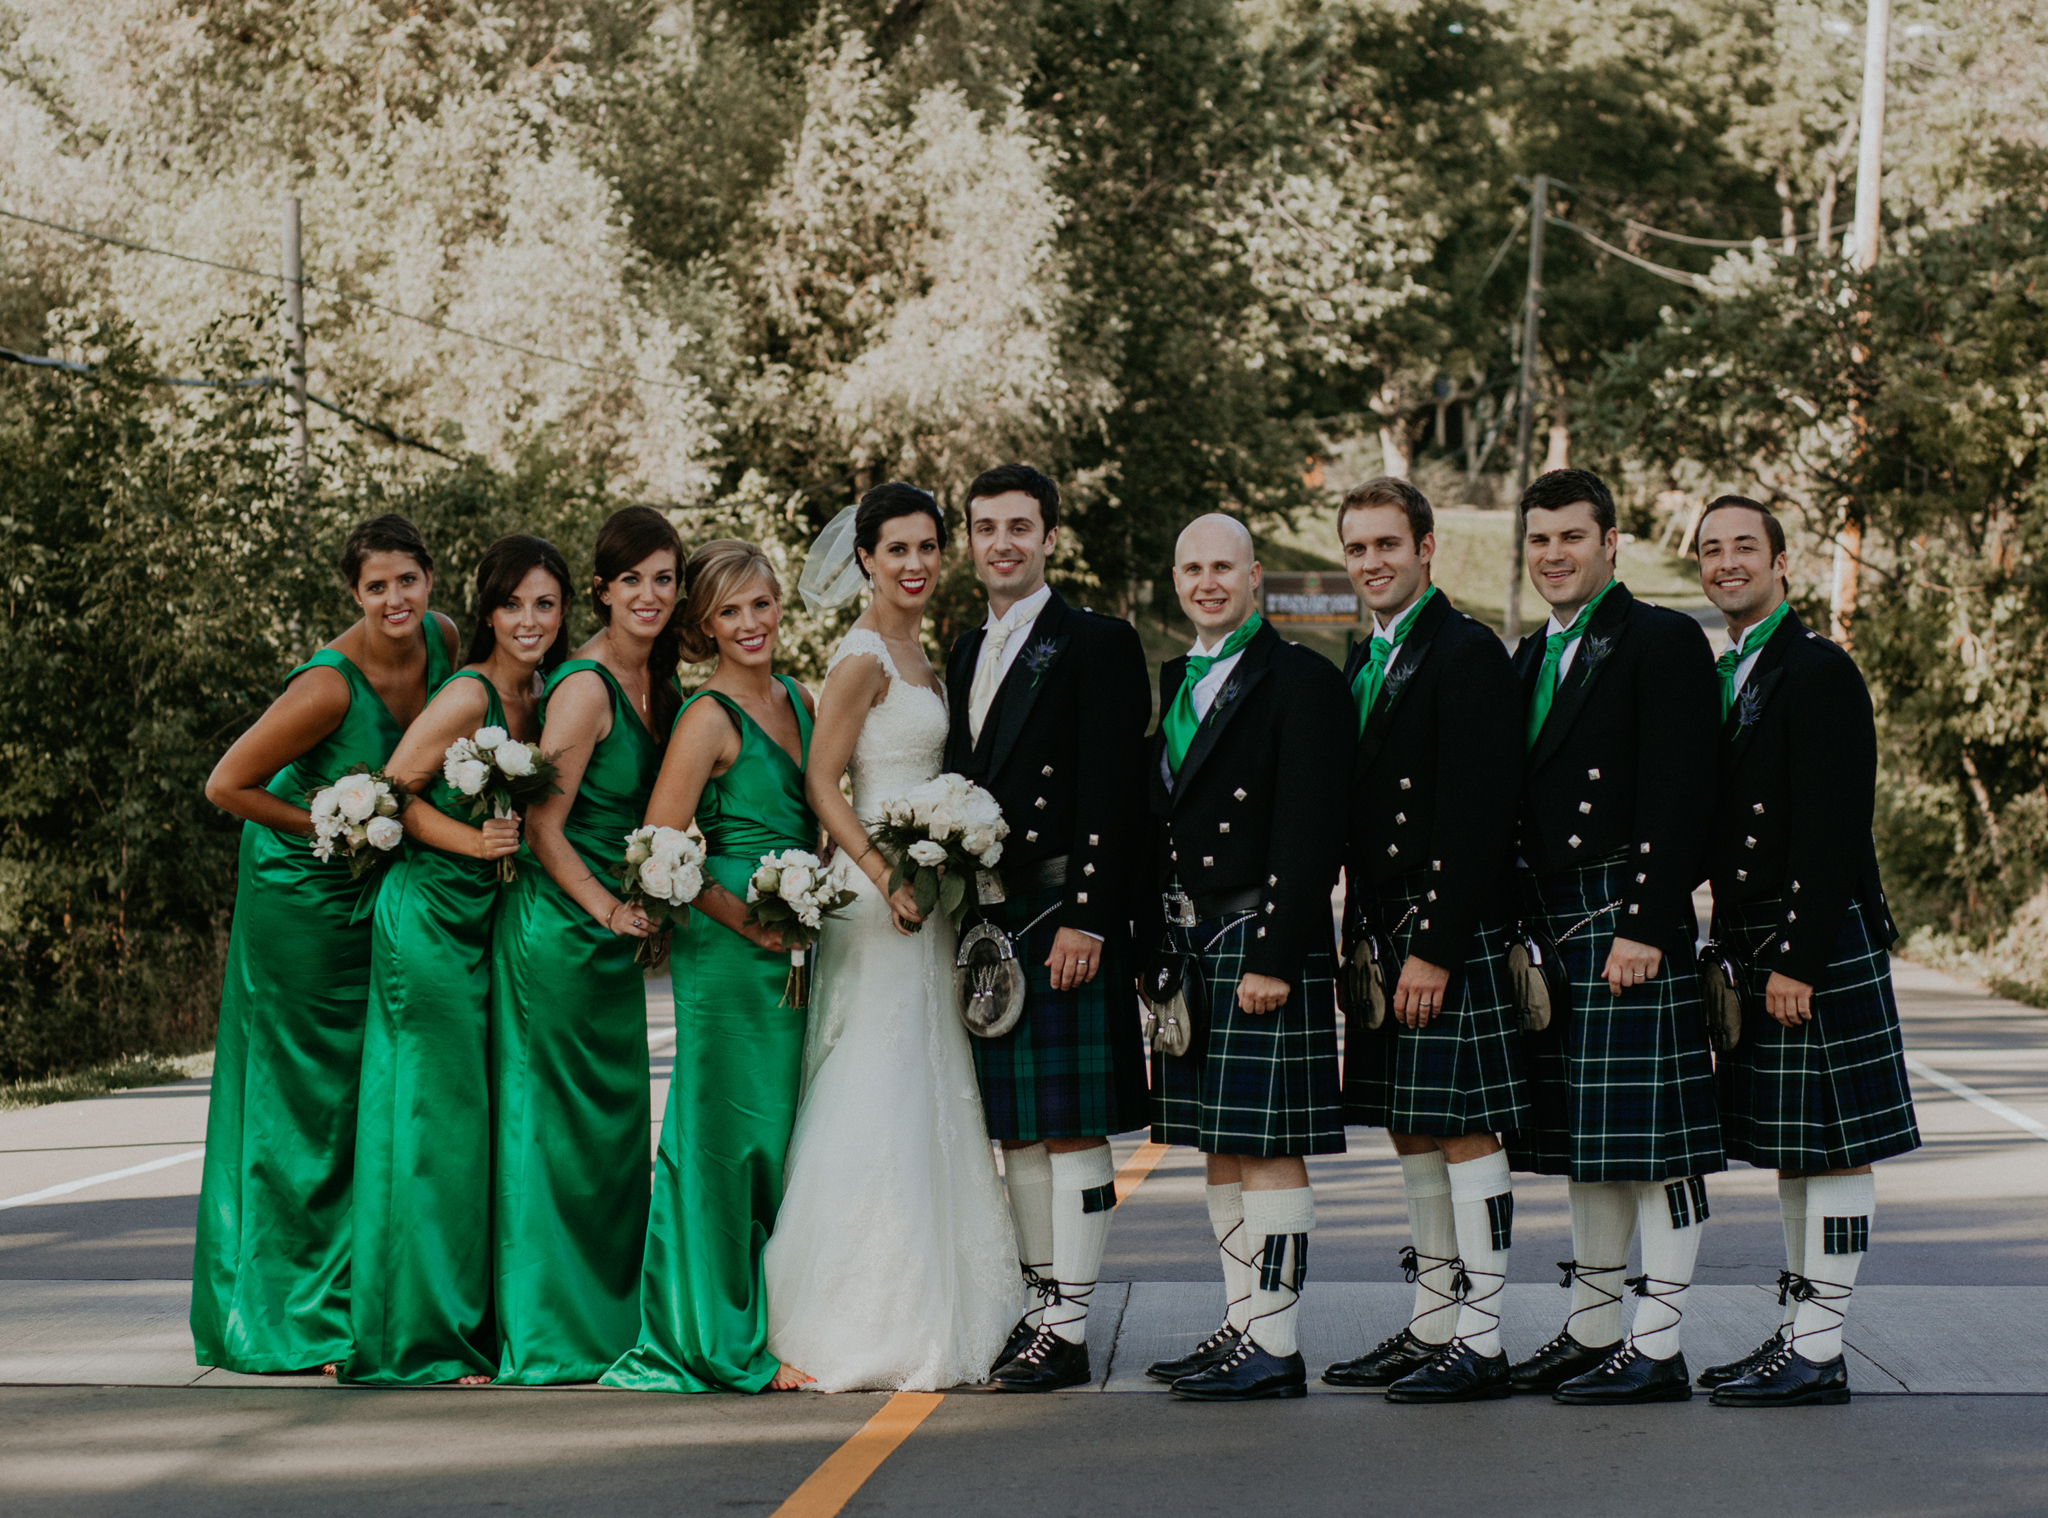 portrait of wedding party in kilts and green dresses posing in street